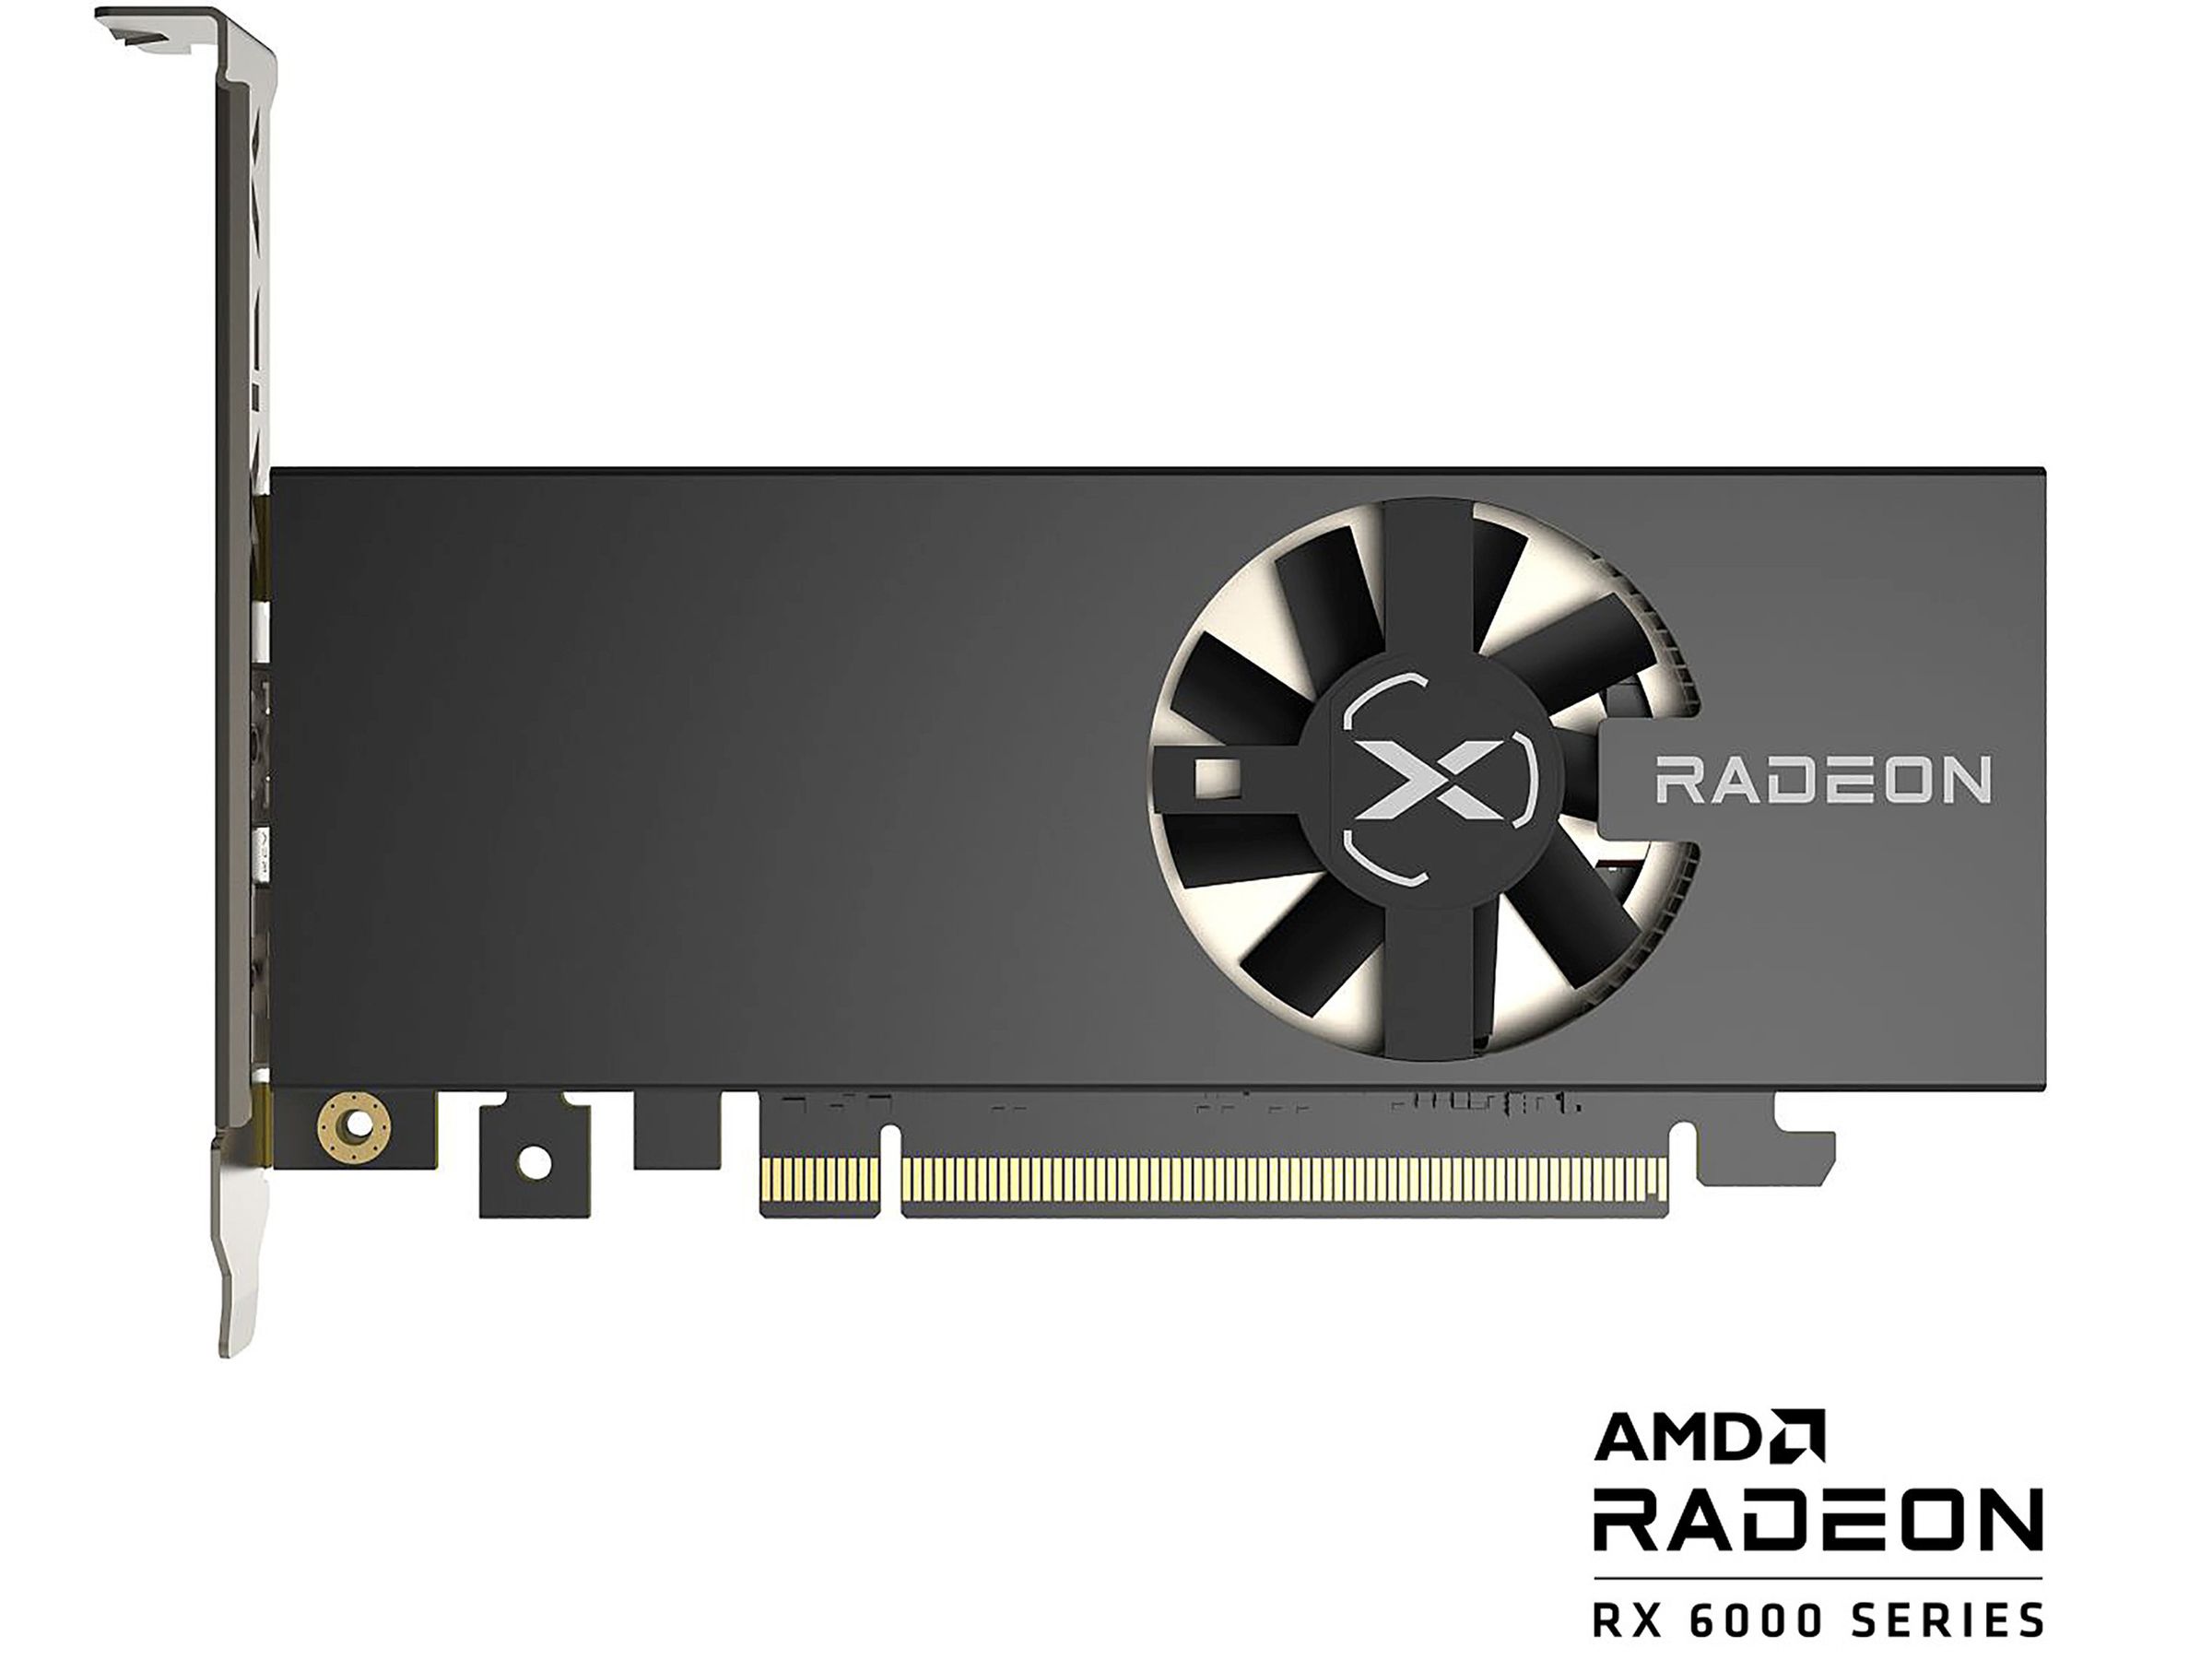 This XFX card looks short, and it’ll be shorter if you attach its low-profile PCIe bracket.